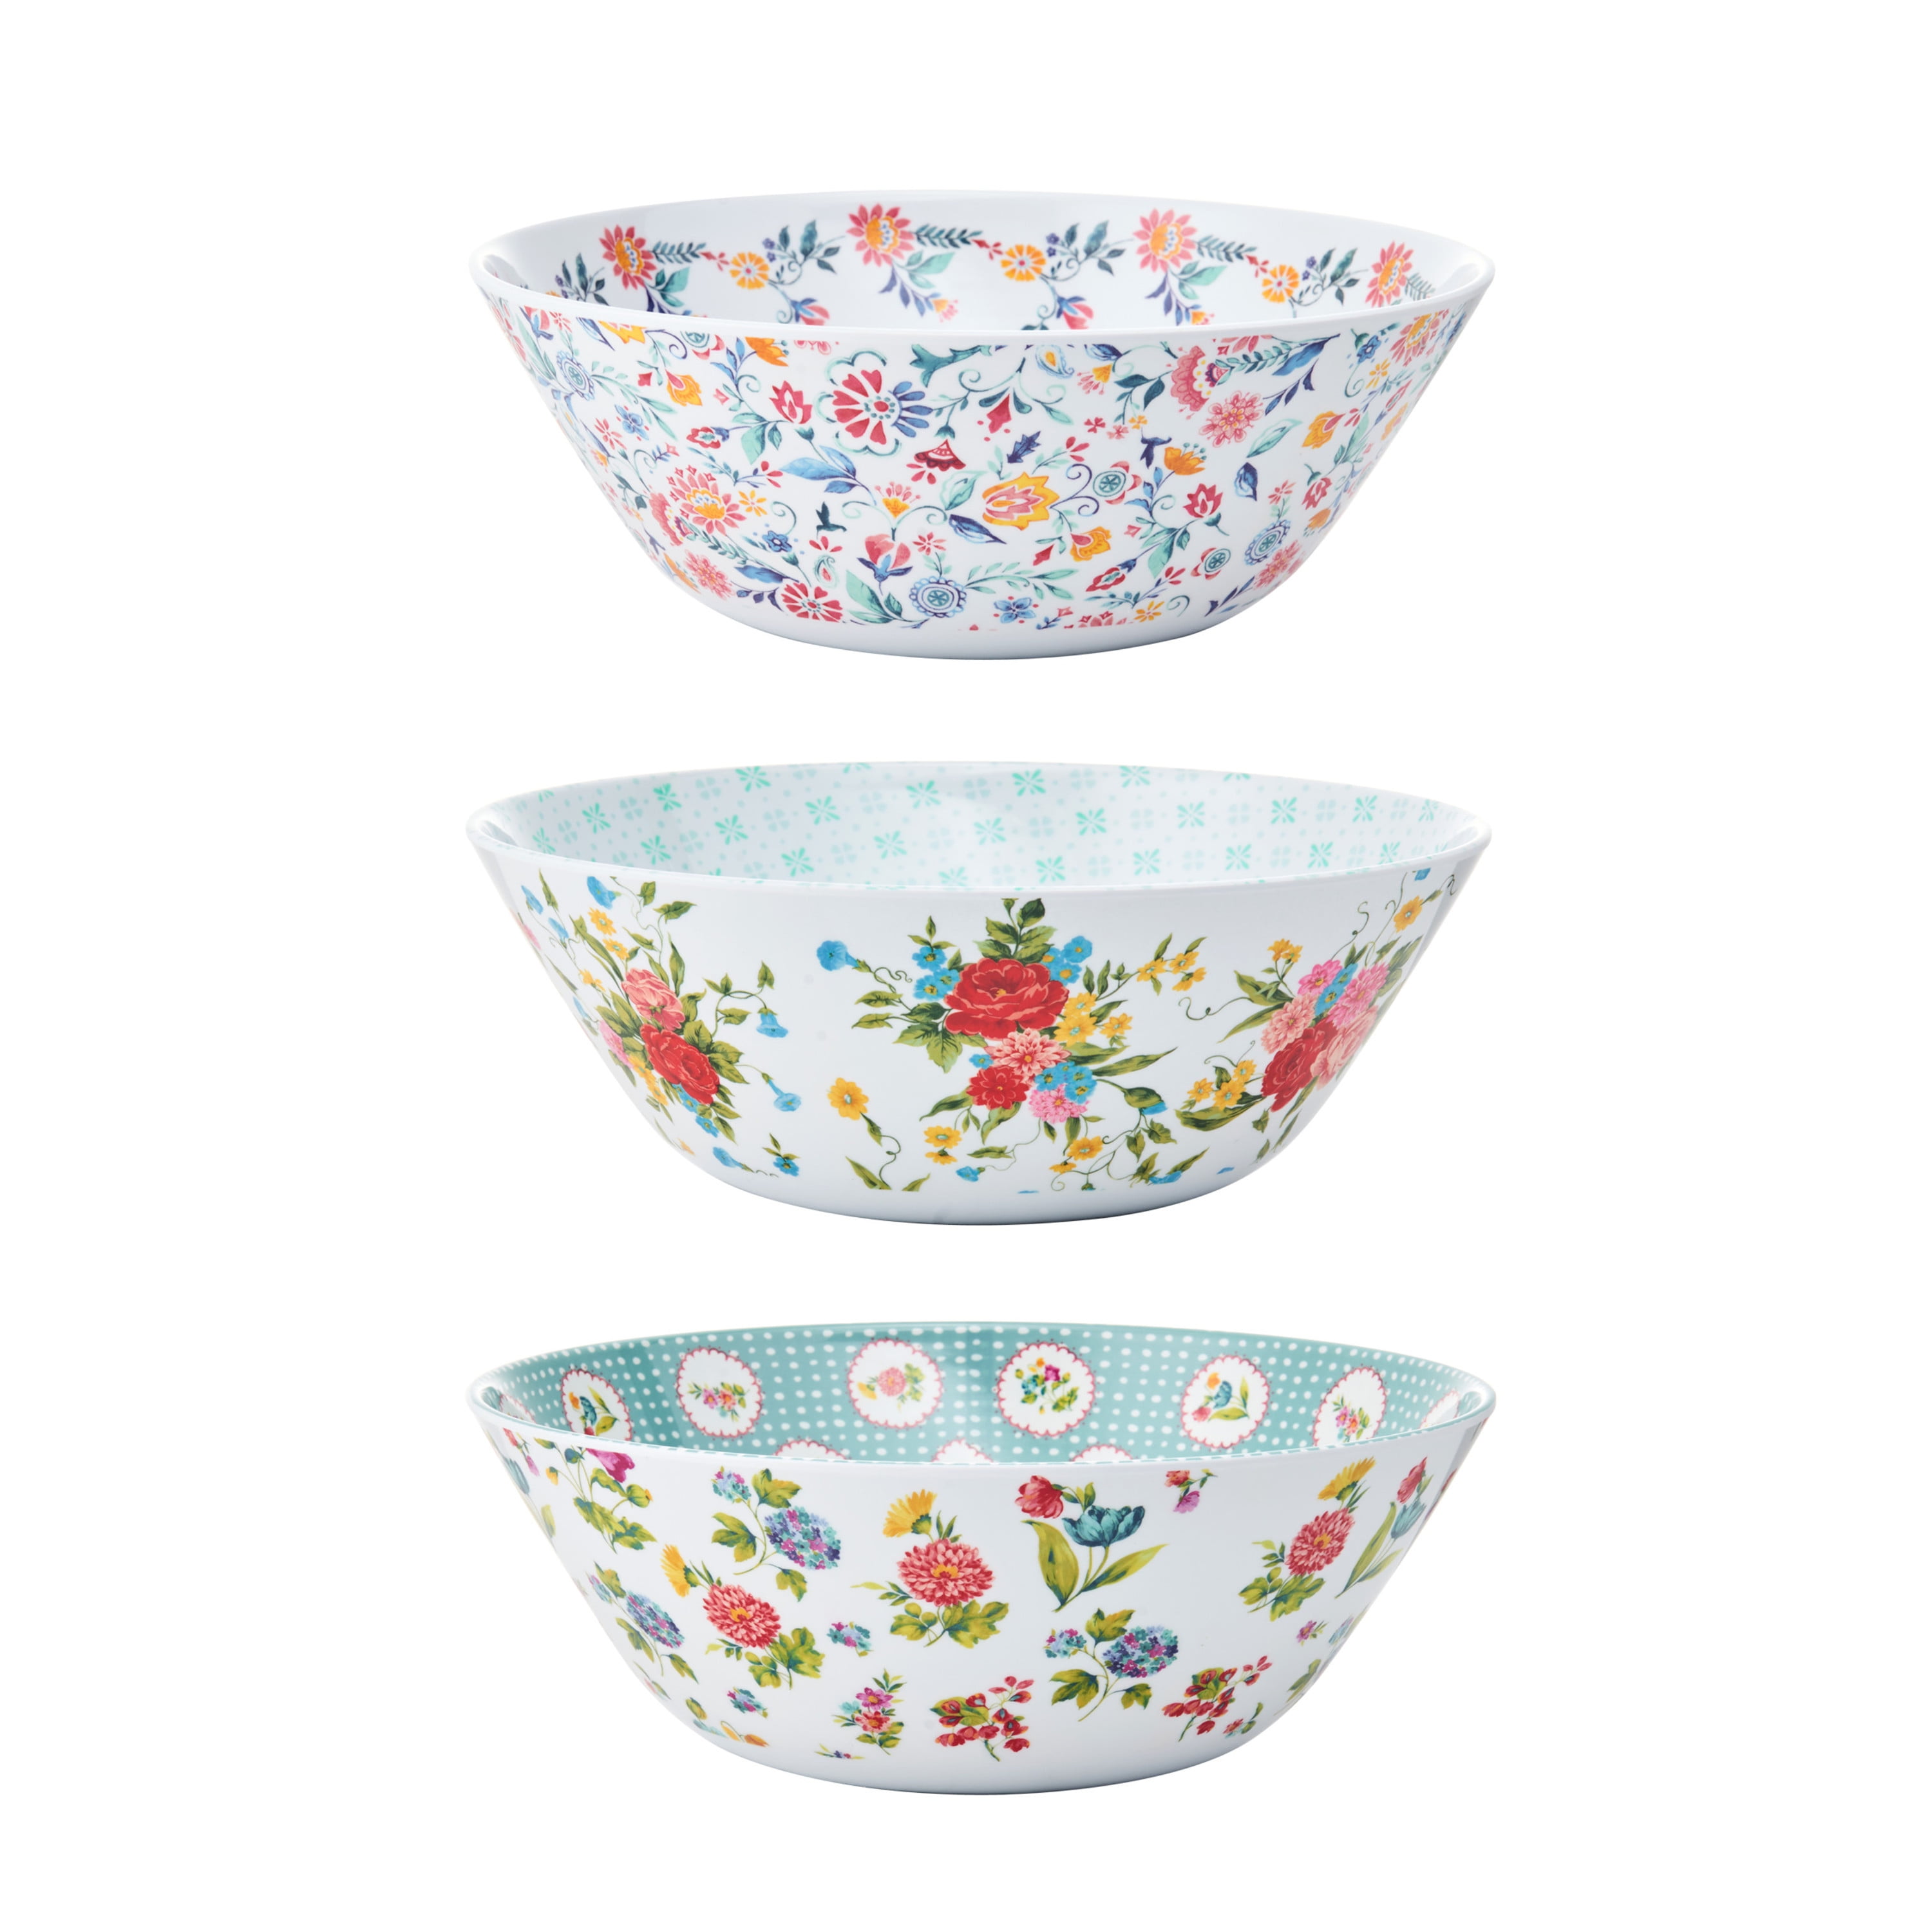 NEW PIONEER WOMAN COUNTRY SPLATTER SALAD BOWL AND UTENSILS 3 PIECE